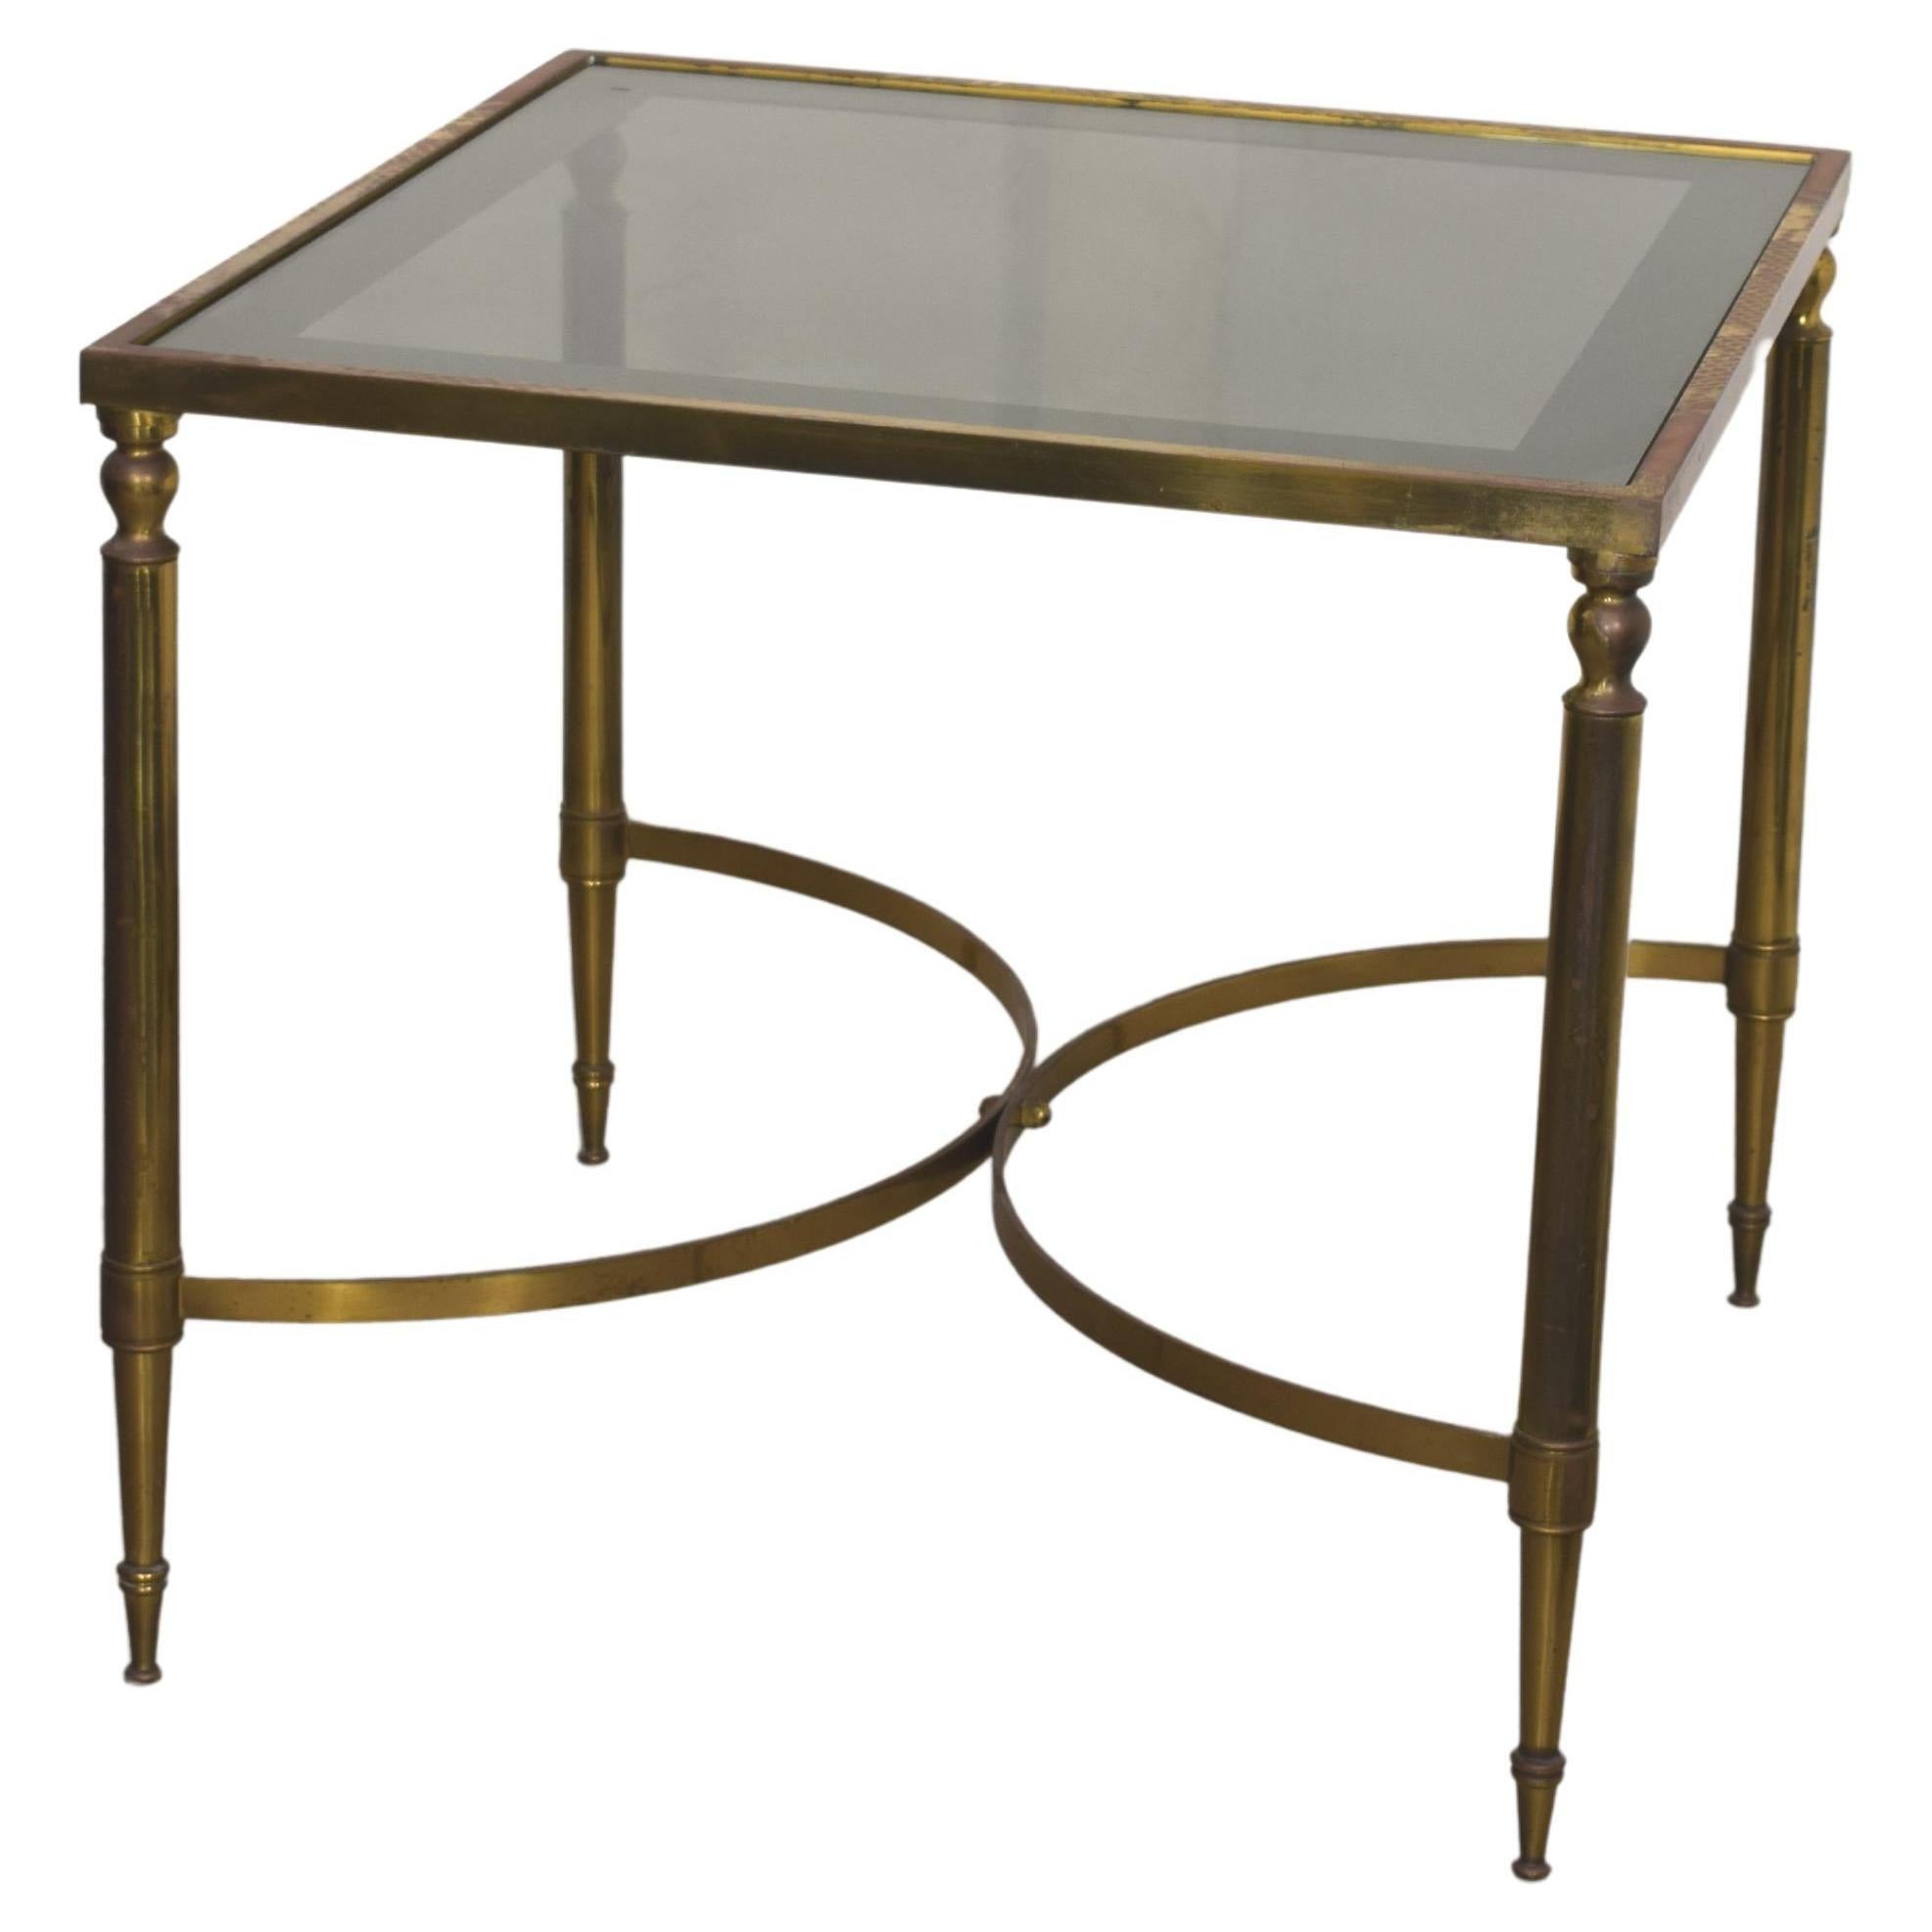 Italian Coffee Table, Brass and Smoked Glass, 1950s